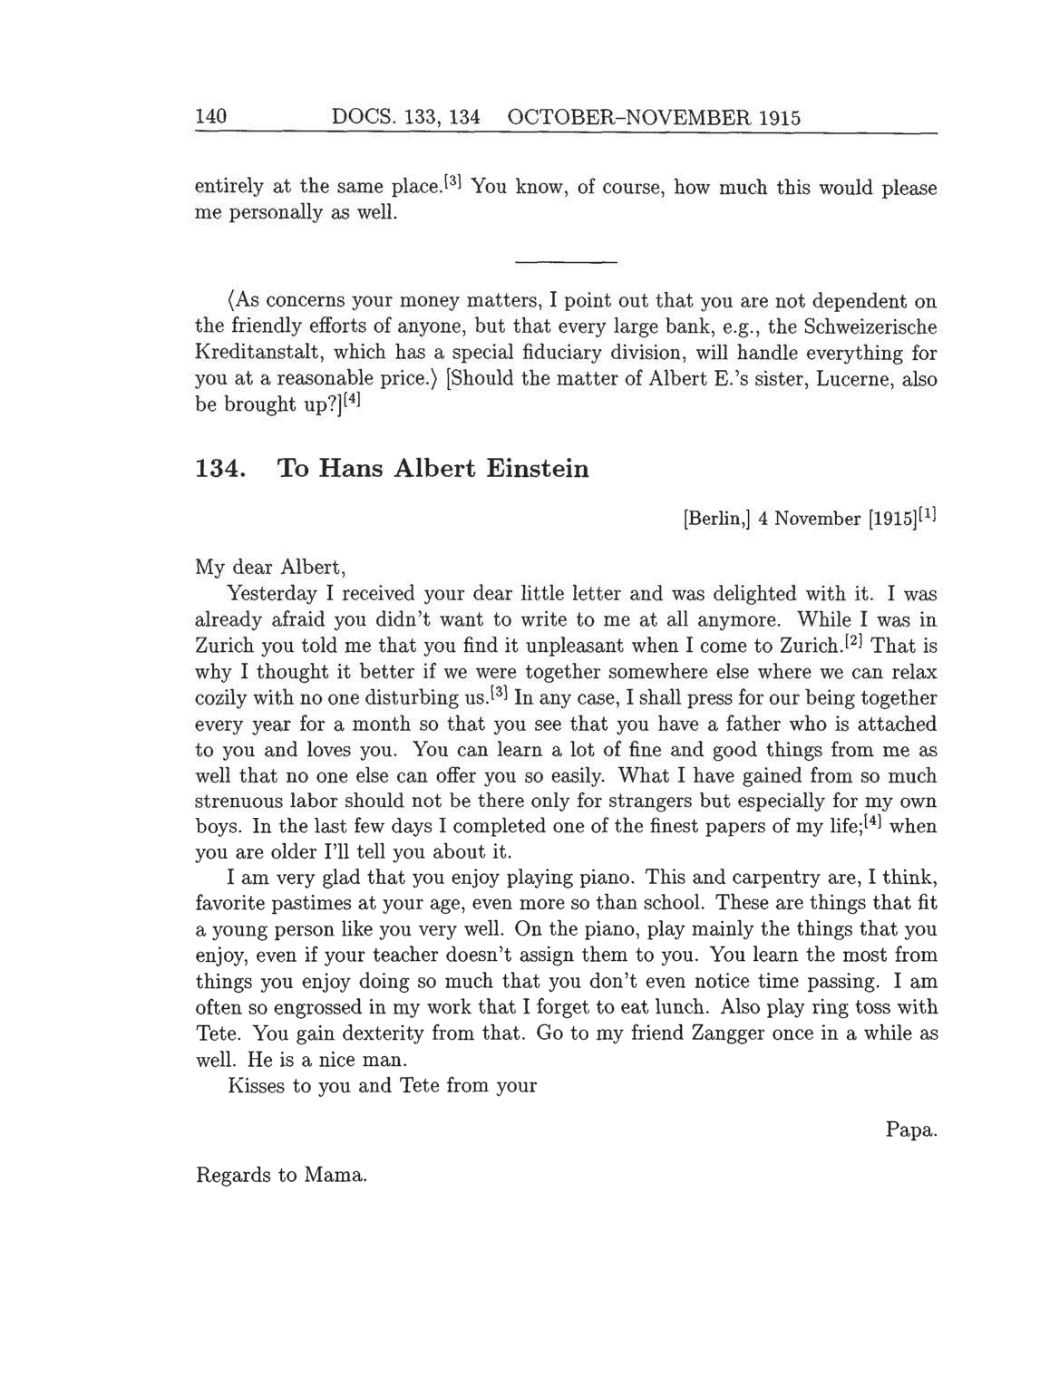 Volume 8: The Berlin Years: Correspondence, 1914-1918 (English translation supplement) page 140